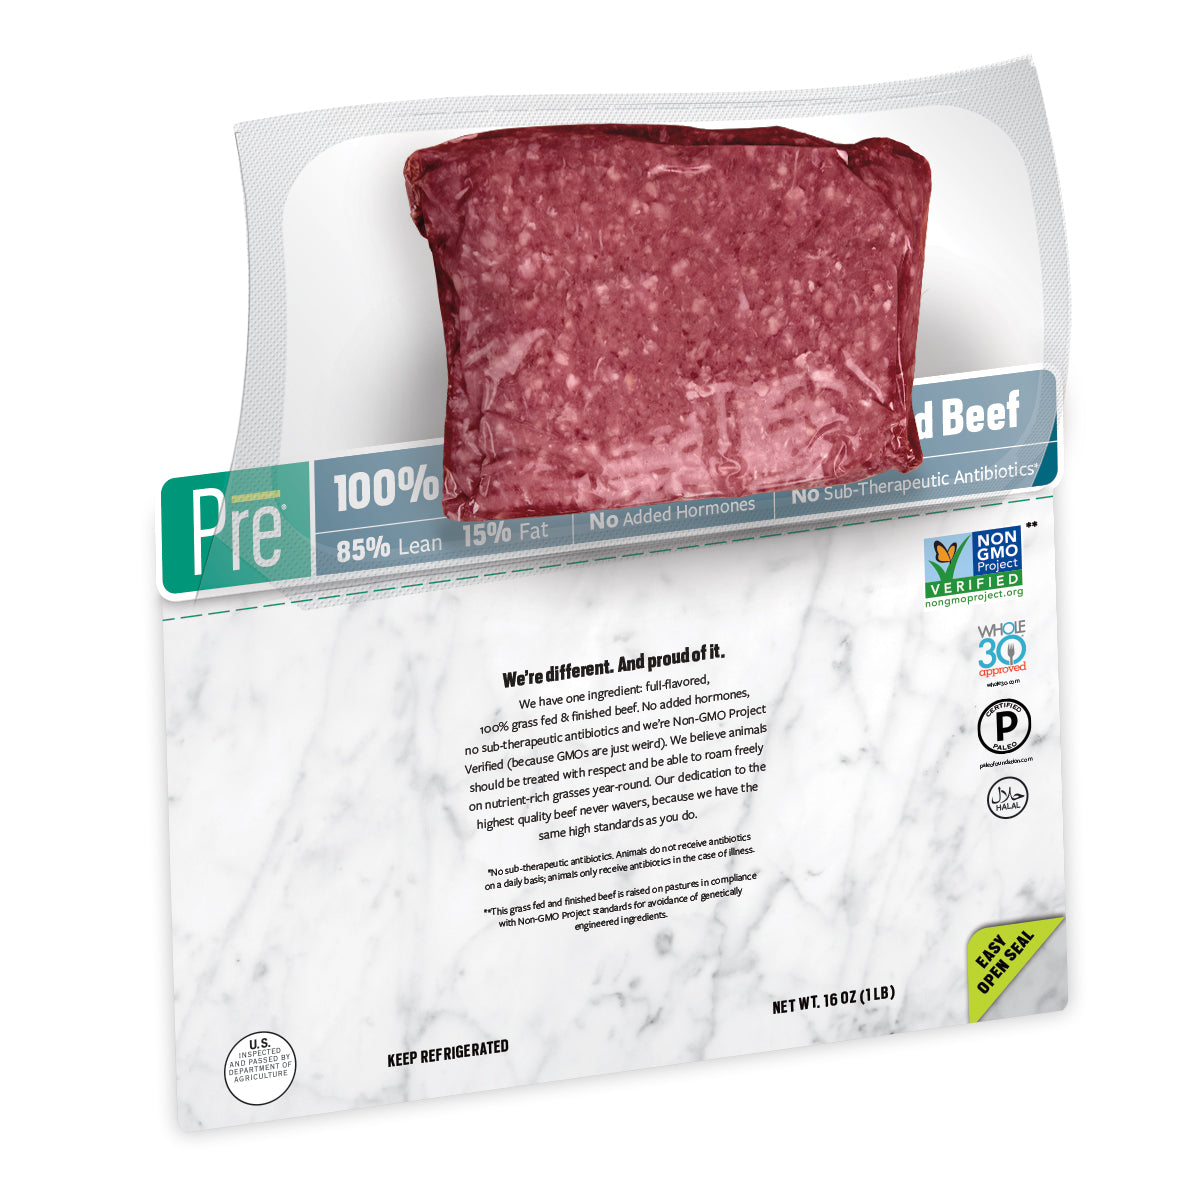  Kirkland Signature Organic Ground Beef - 85% Lean and 15% Fat -  Raised Without Antibiotics - No Added Growth Hormones - Ready Set Gourmet  Donate a Meal Program - 2 Pack (64oz Each) : Grocery & Gourmet Food